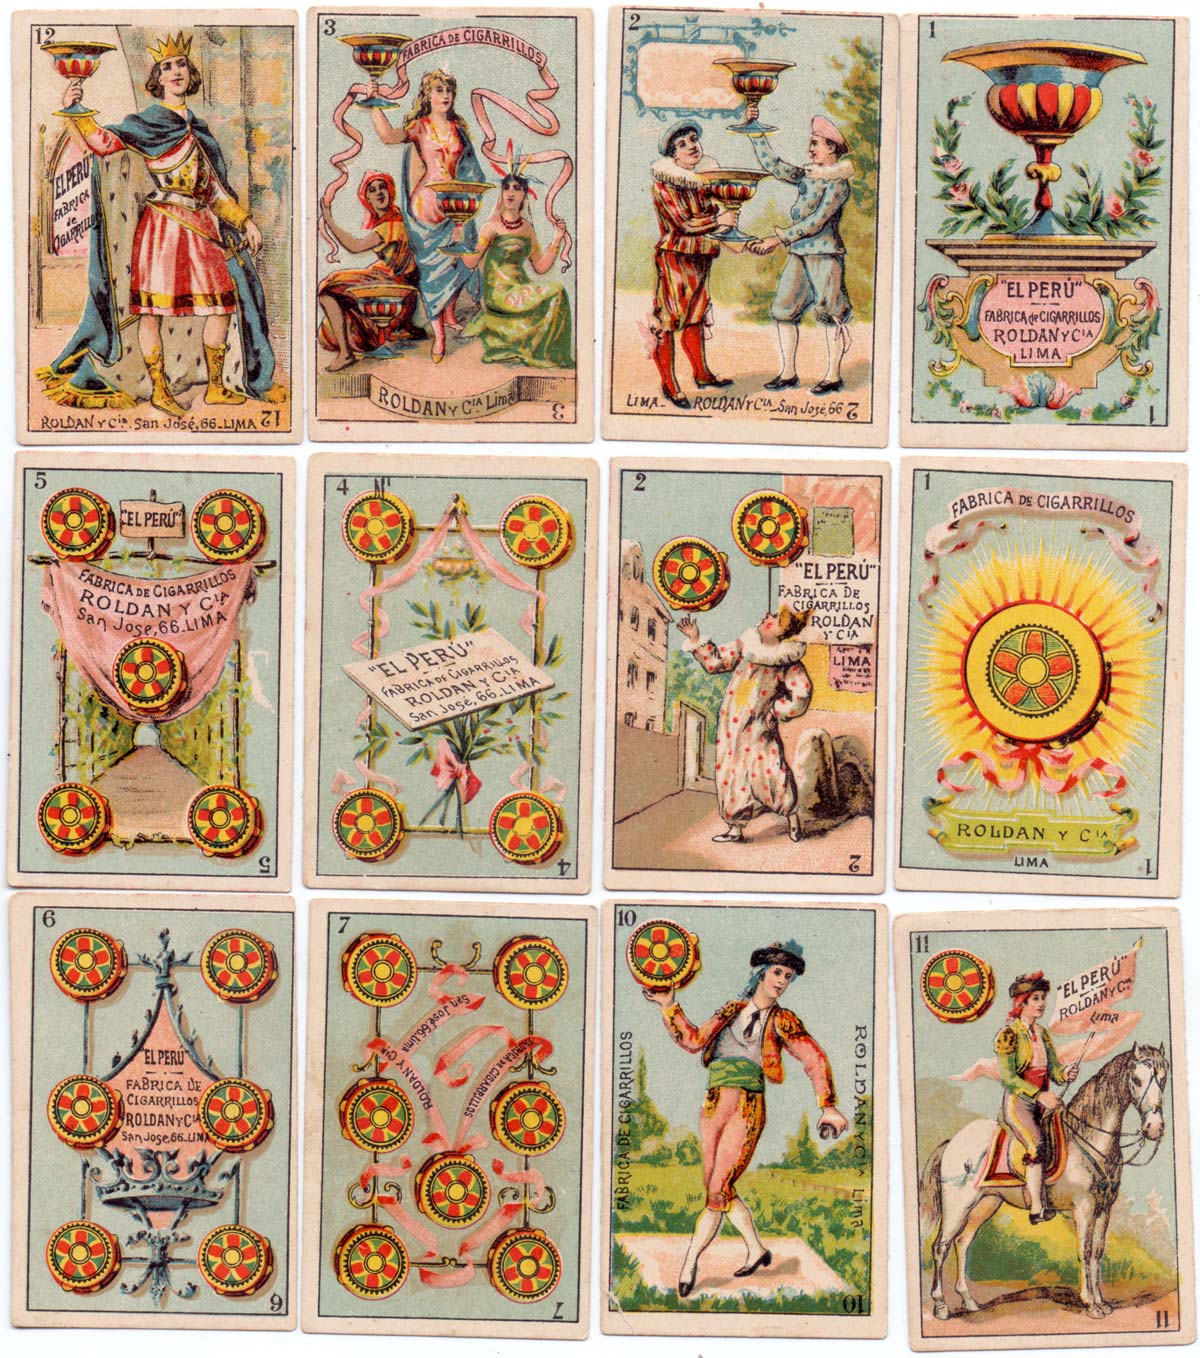 Cards from a fantasy publicity pack for the Peruvian tobacco company Roldan y Cia, San José 66, Lima. c.1890